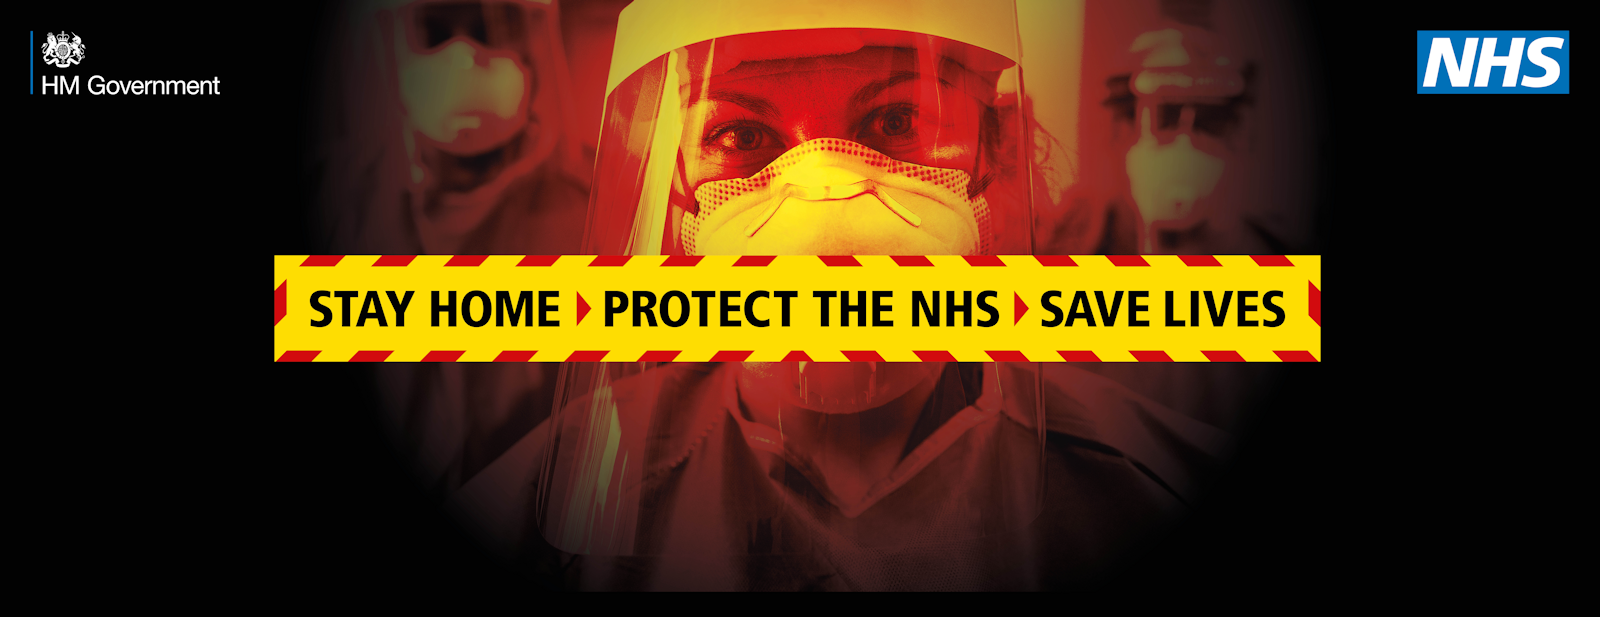 Protect the NHS, stay at home